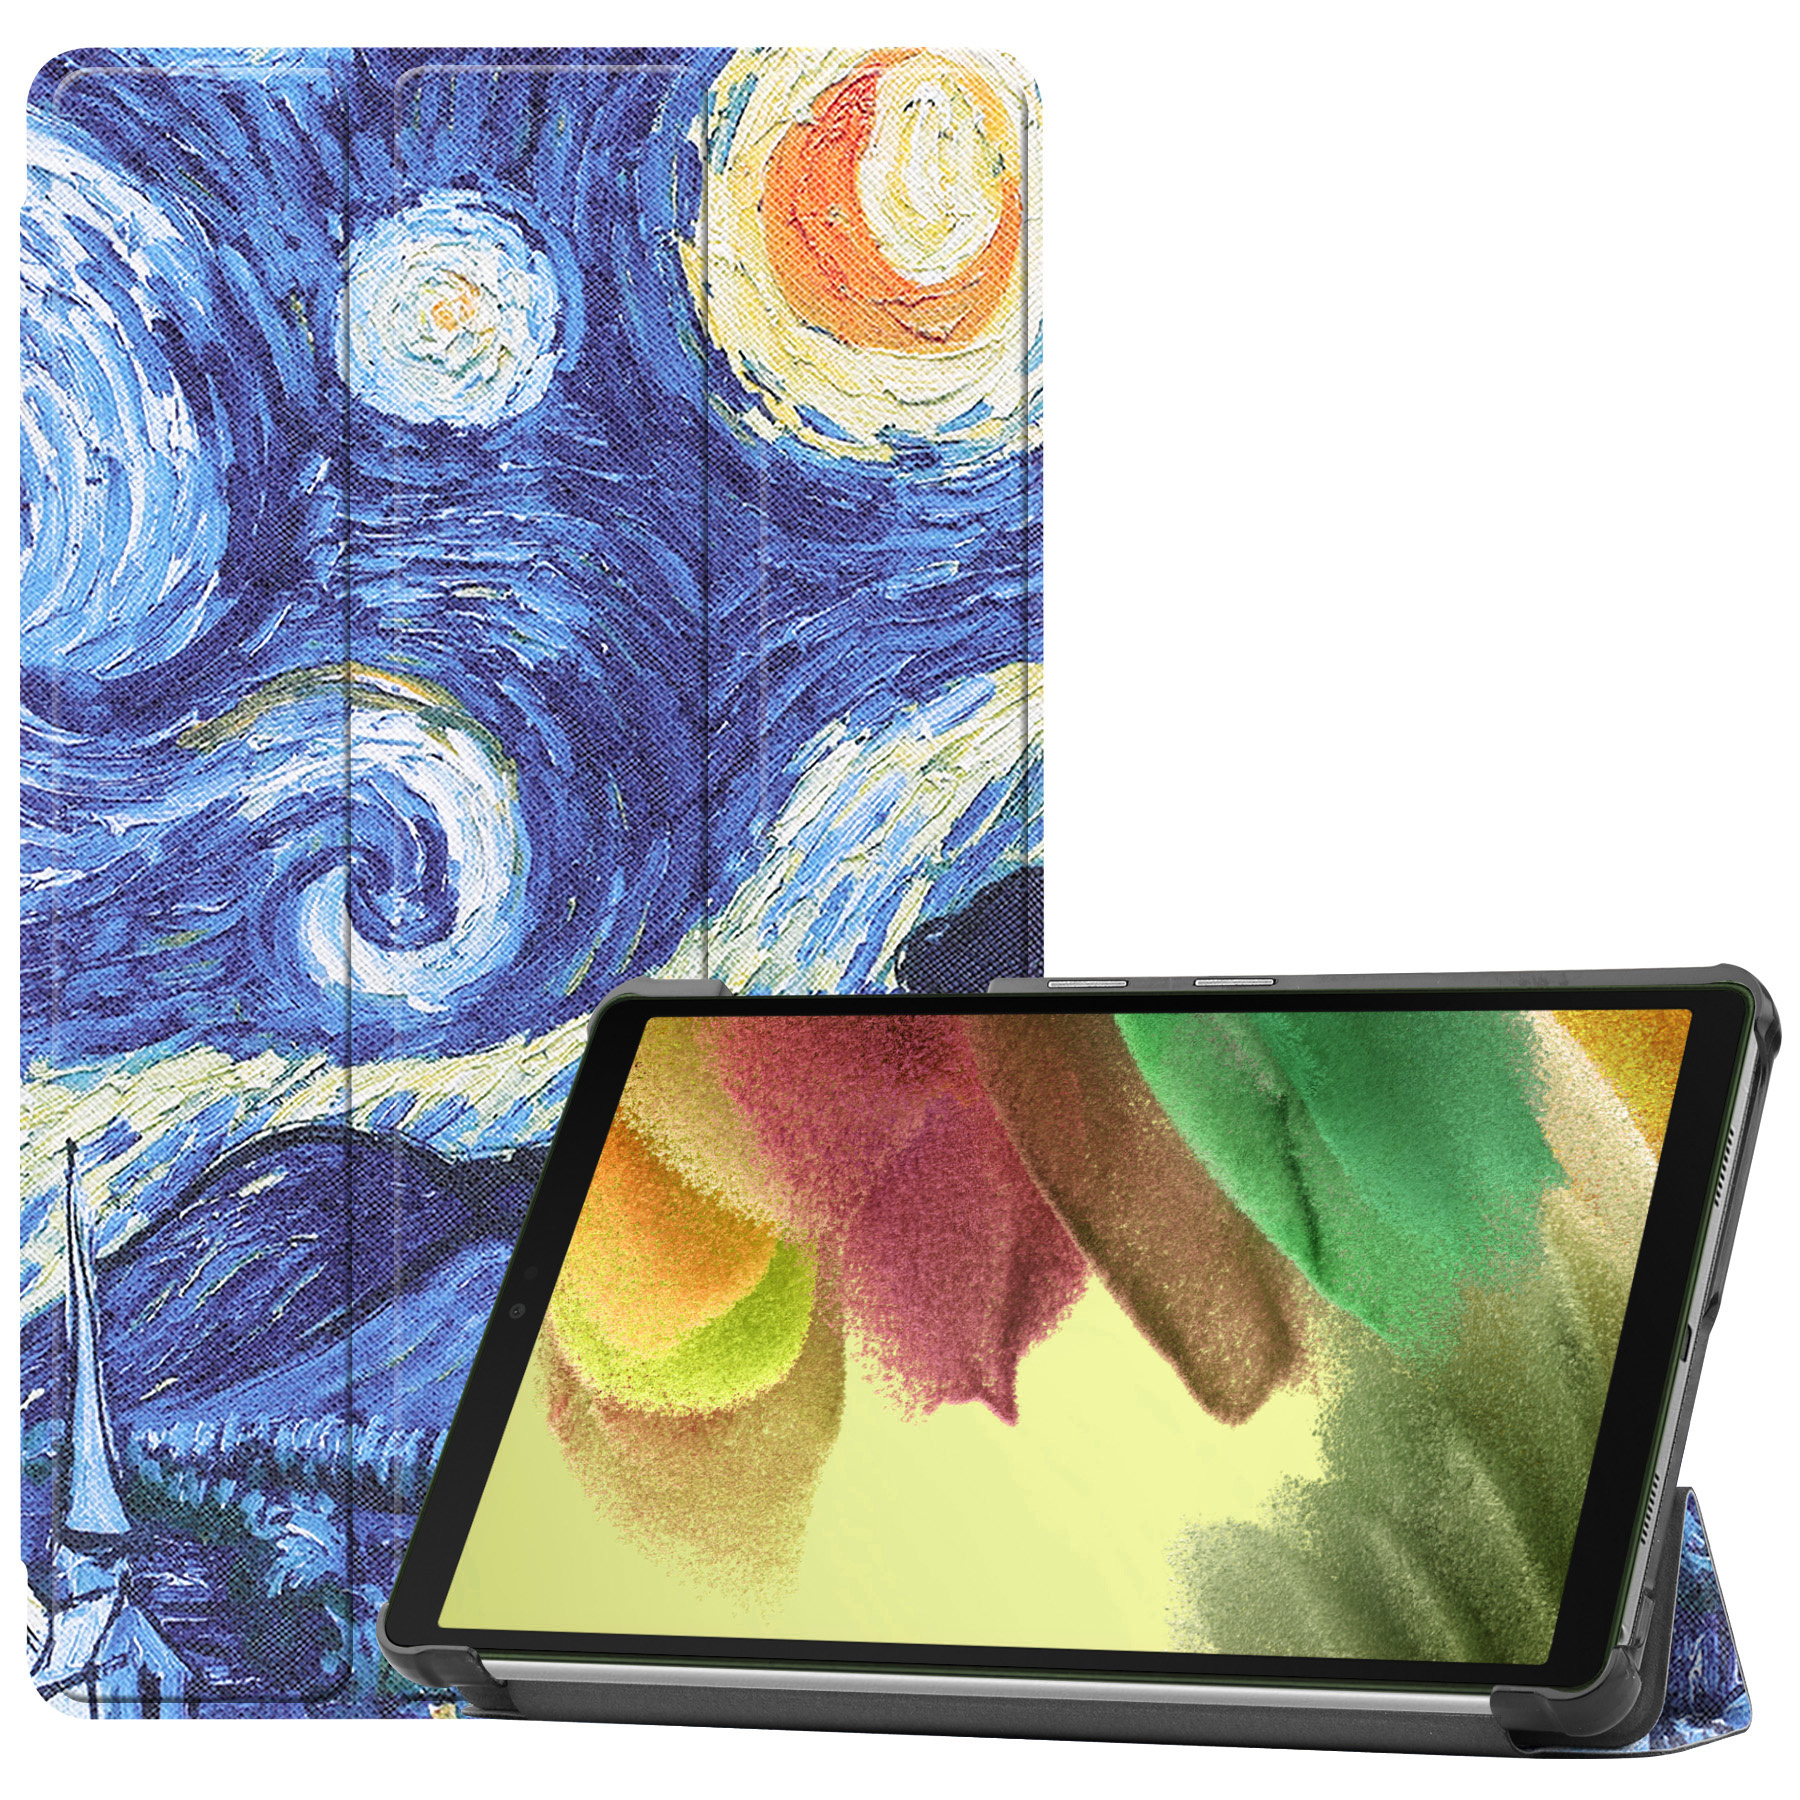 Nomfy Samsung Tab S6 Lite Hoesje Book Case Hoes - Samsung Galaxy Tab S6 Lite Hoes Hardcover Hoesje - Sterrenhemel